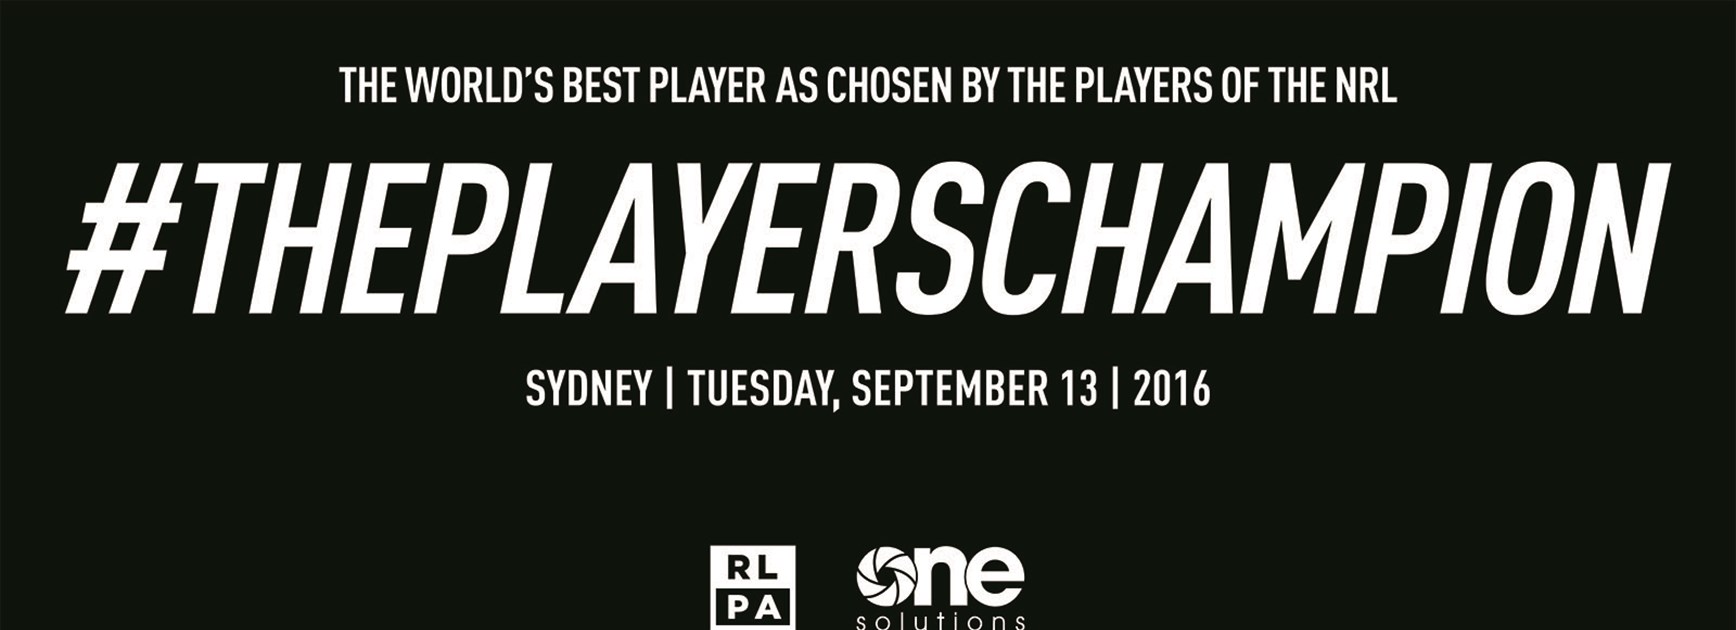 The Rugby League Players Association has launched its new annual awards night, the Players' Champion.